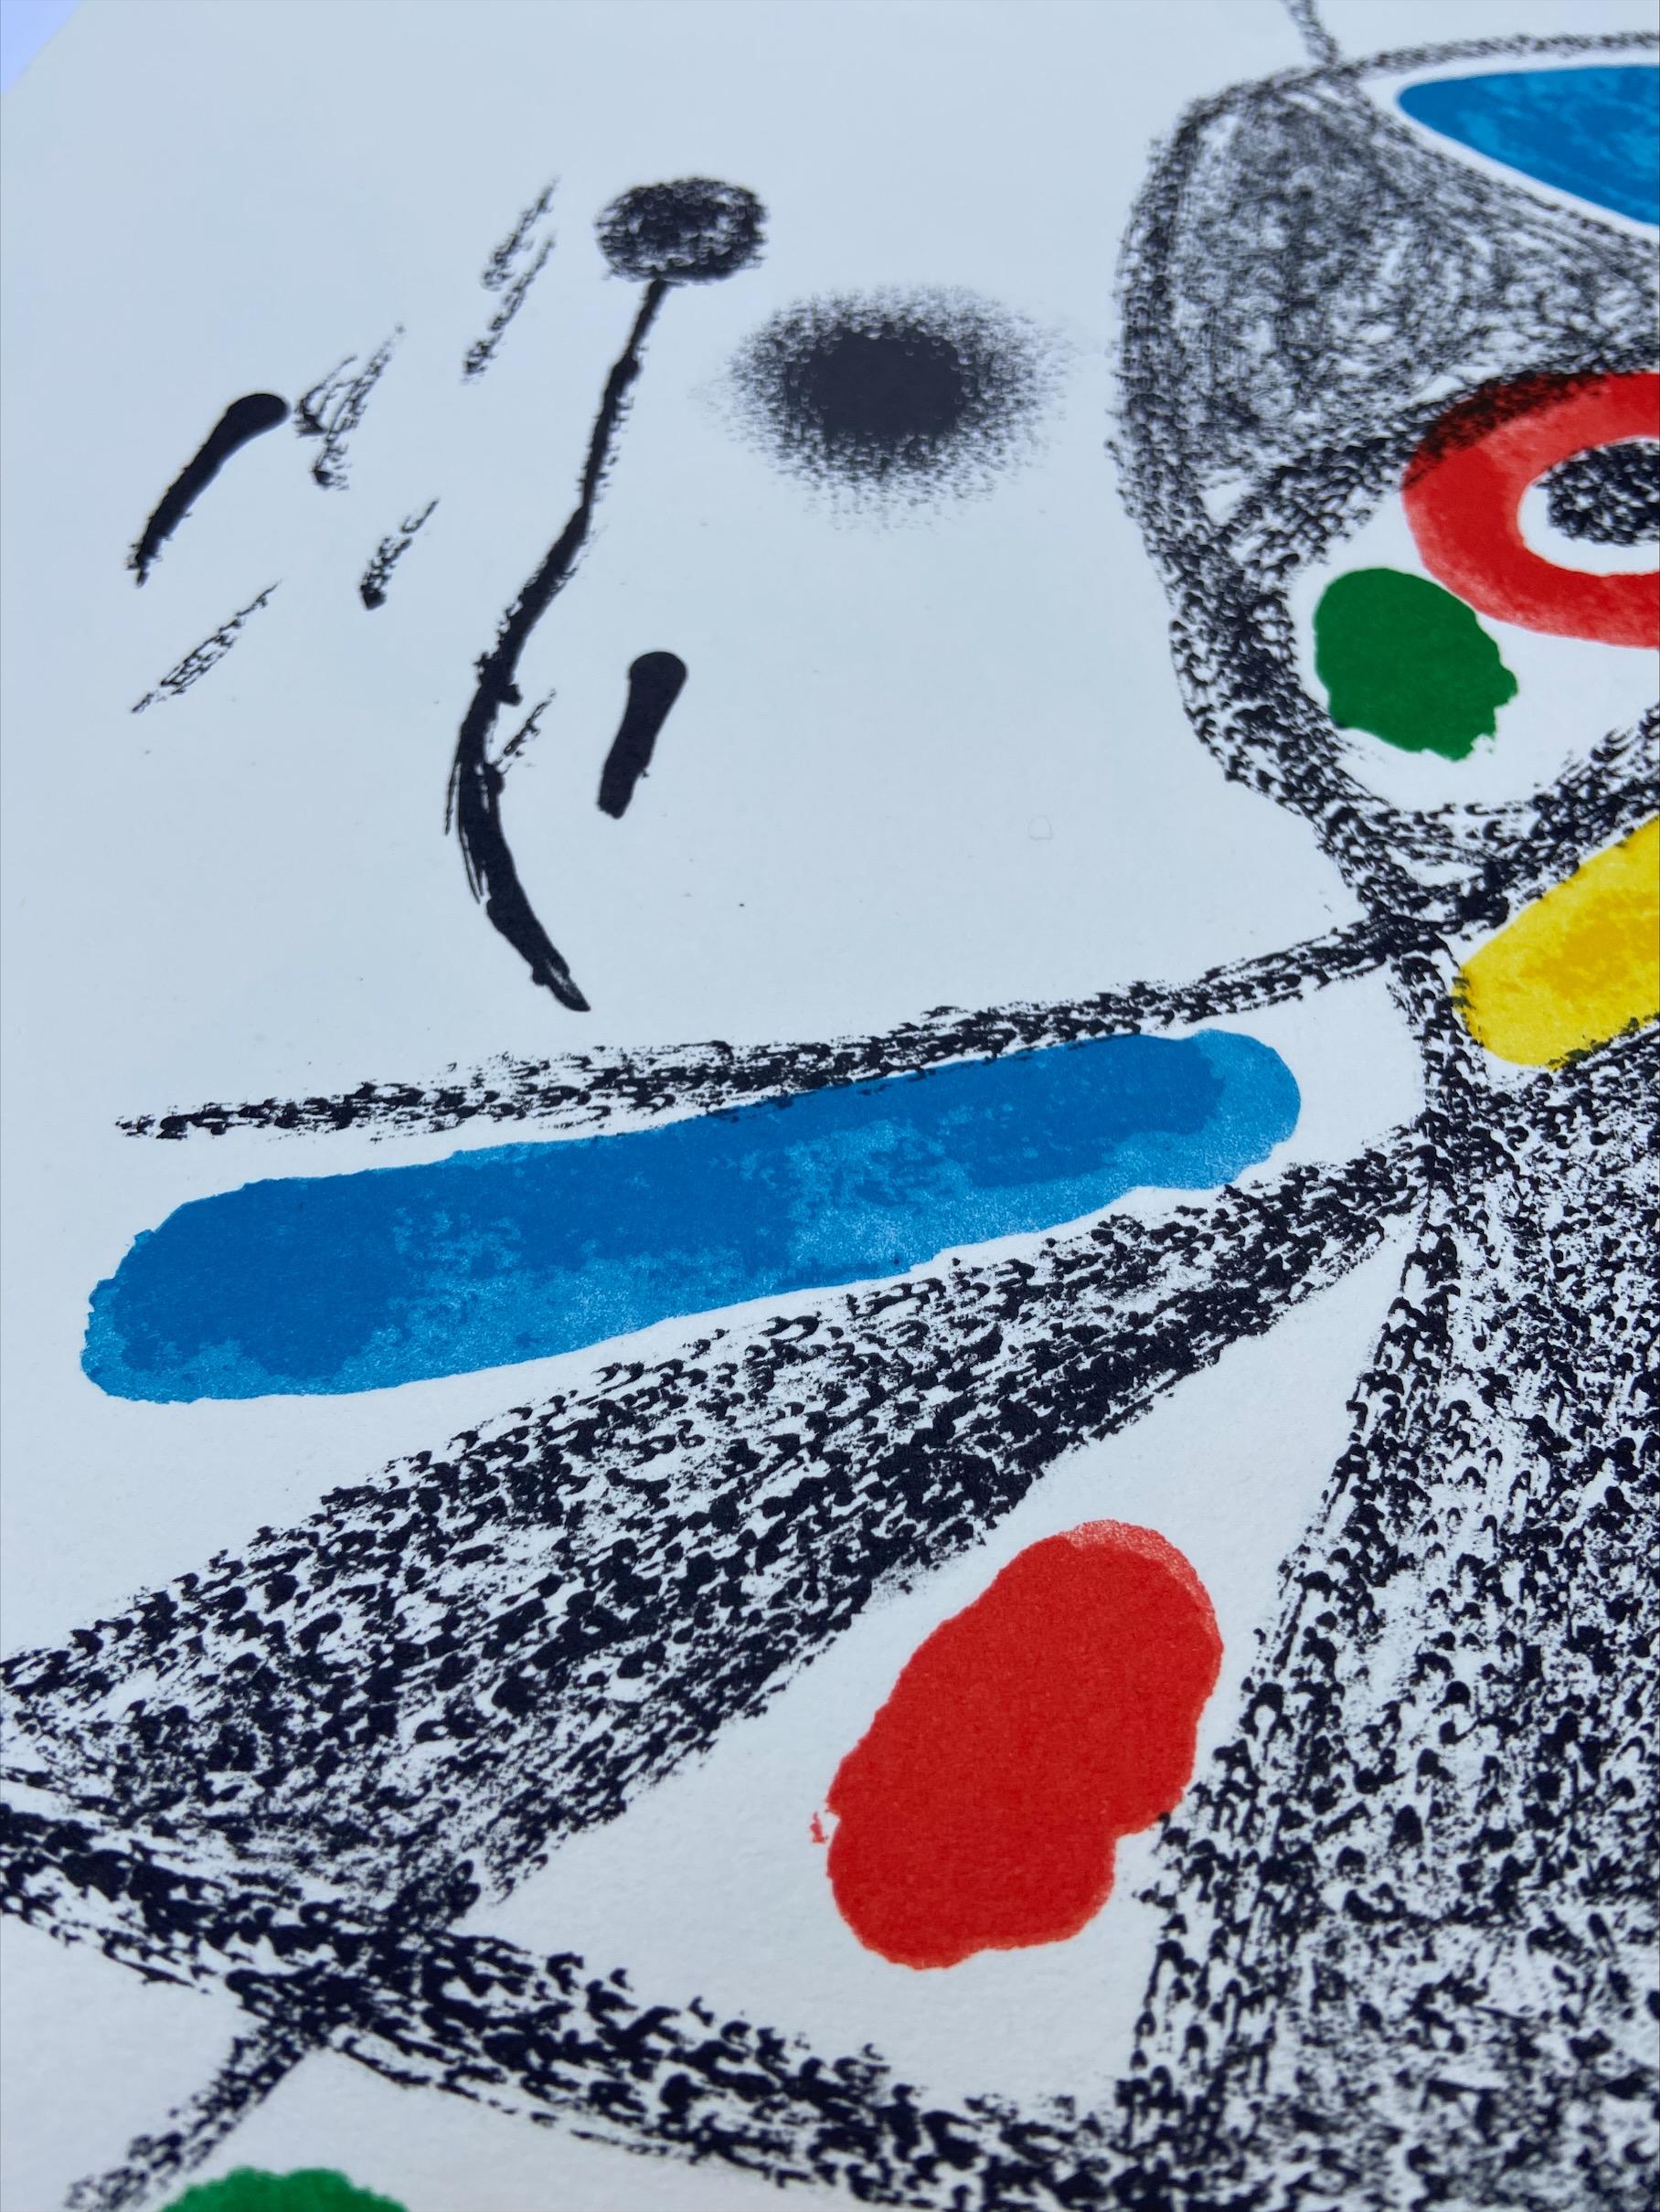 Joan Miró - Maravillas con variaciones n-2
Lithography 
35,7x49,6cm
Signed in the plate 
1975
Edition of 1500 copies on Guarro paper
Publisher : Poligrafa Barcelona 
890€